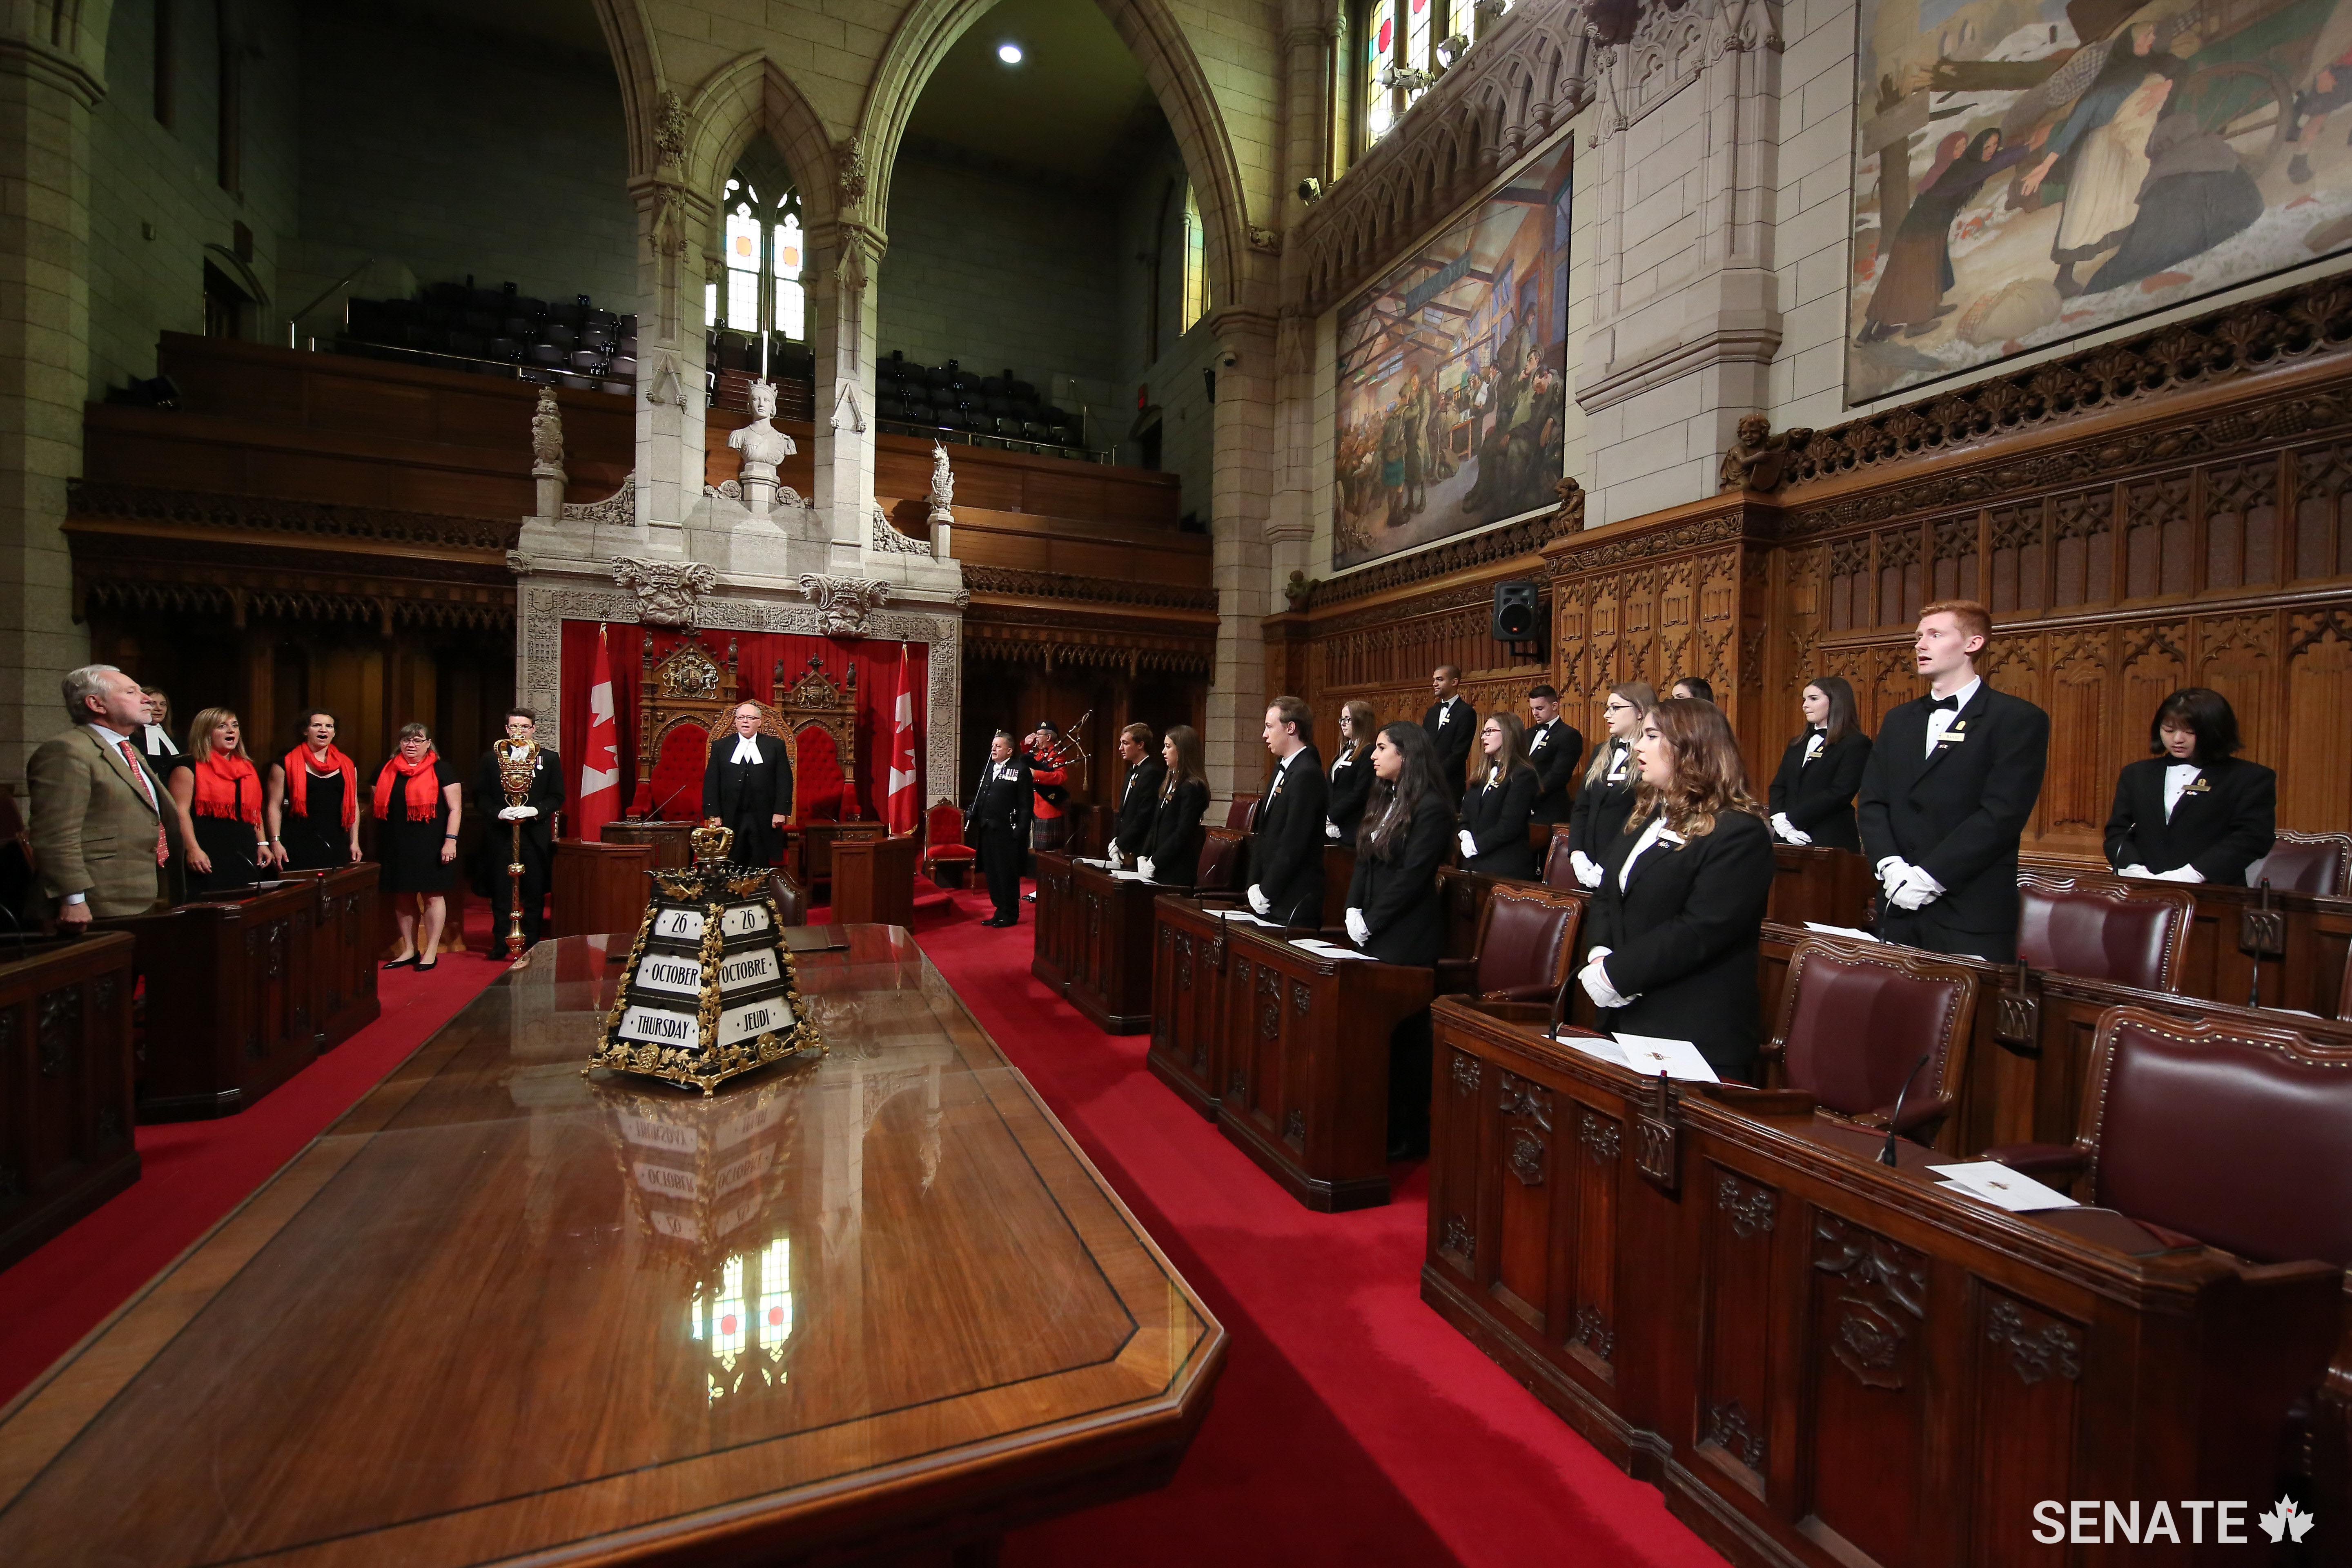 Speaker George J. Furey along with Senator Peter Harder, Government Representative in the Senate, and the Senate pages rise for a singing of the national anthem before taking their oaths to Queen and country.